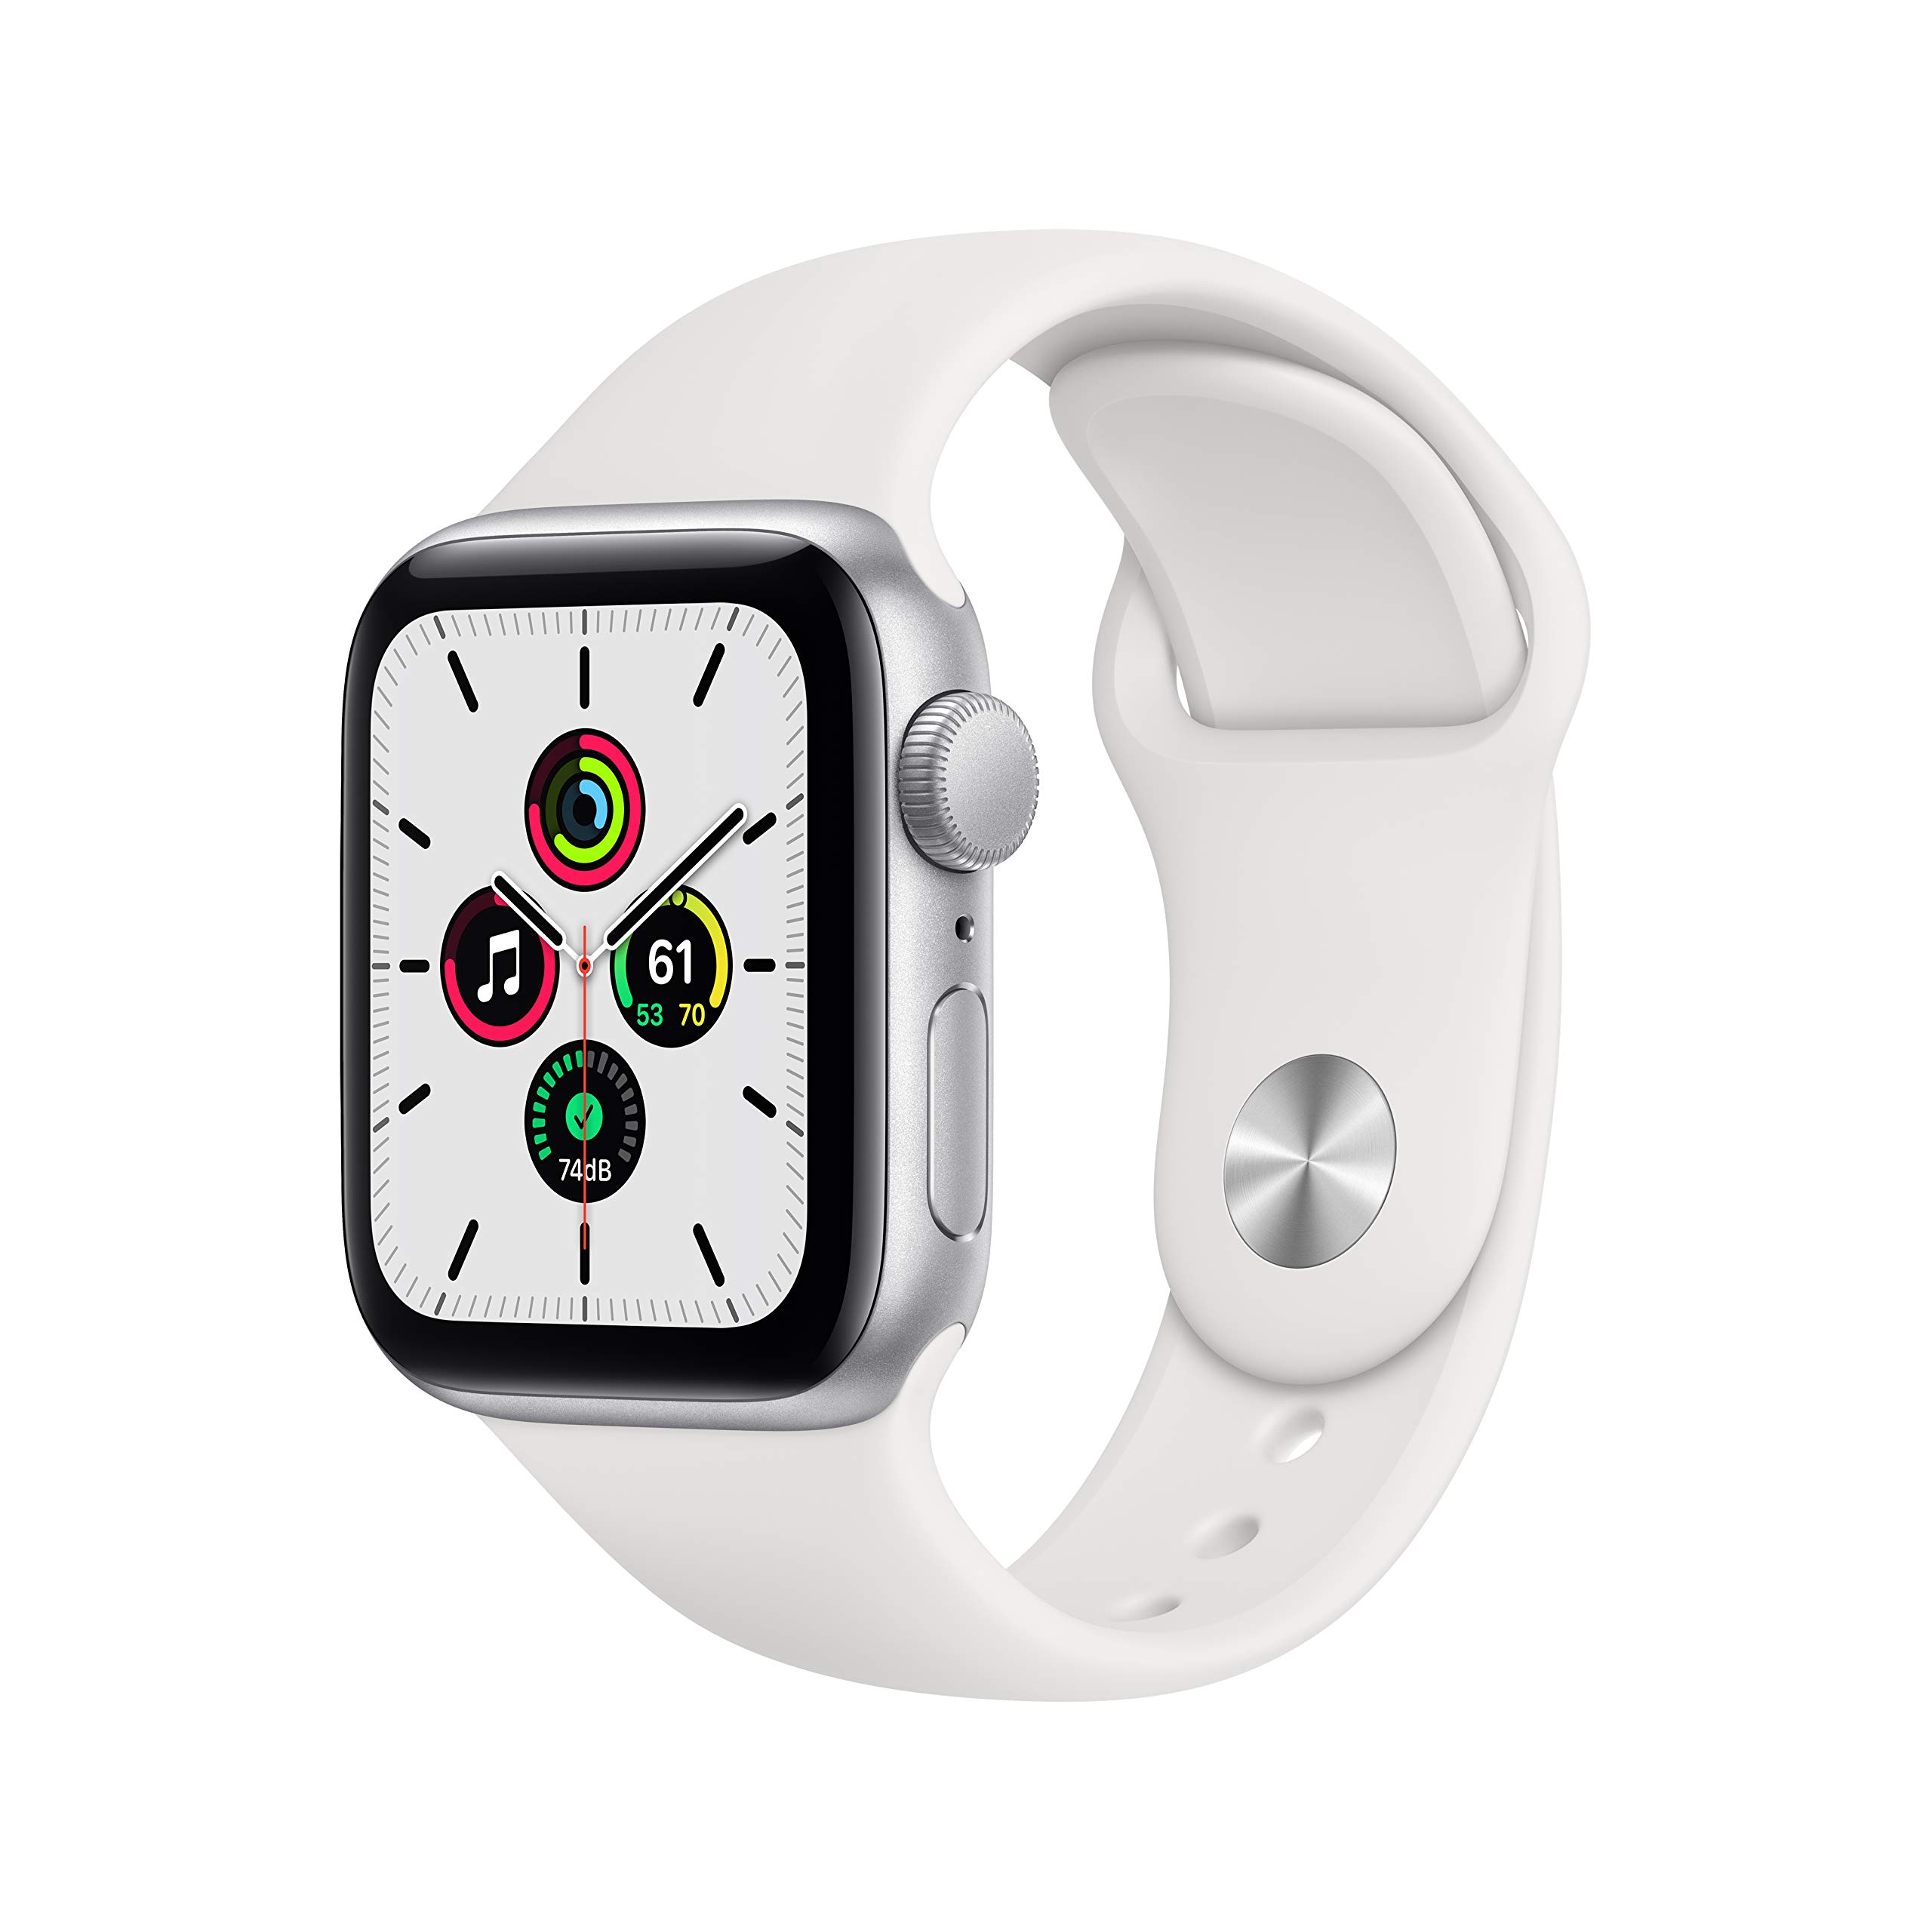 Apple Watch SE (GPS, 40mm) - Silver Aluminum Case with White Sport Band